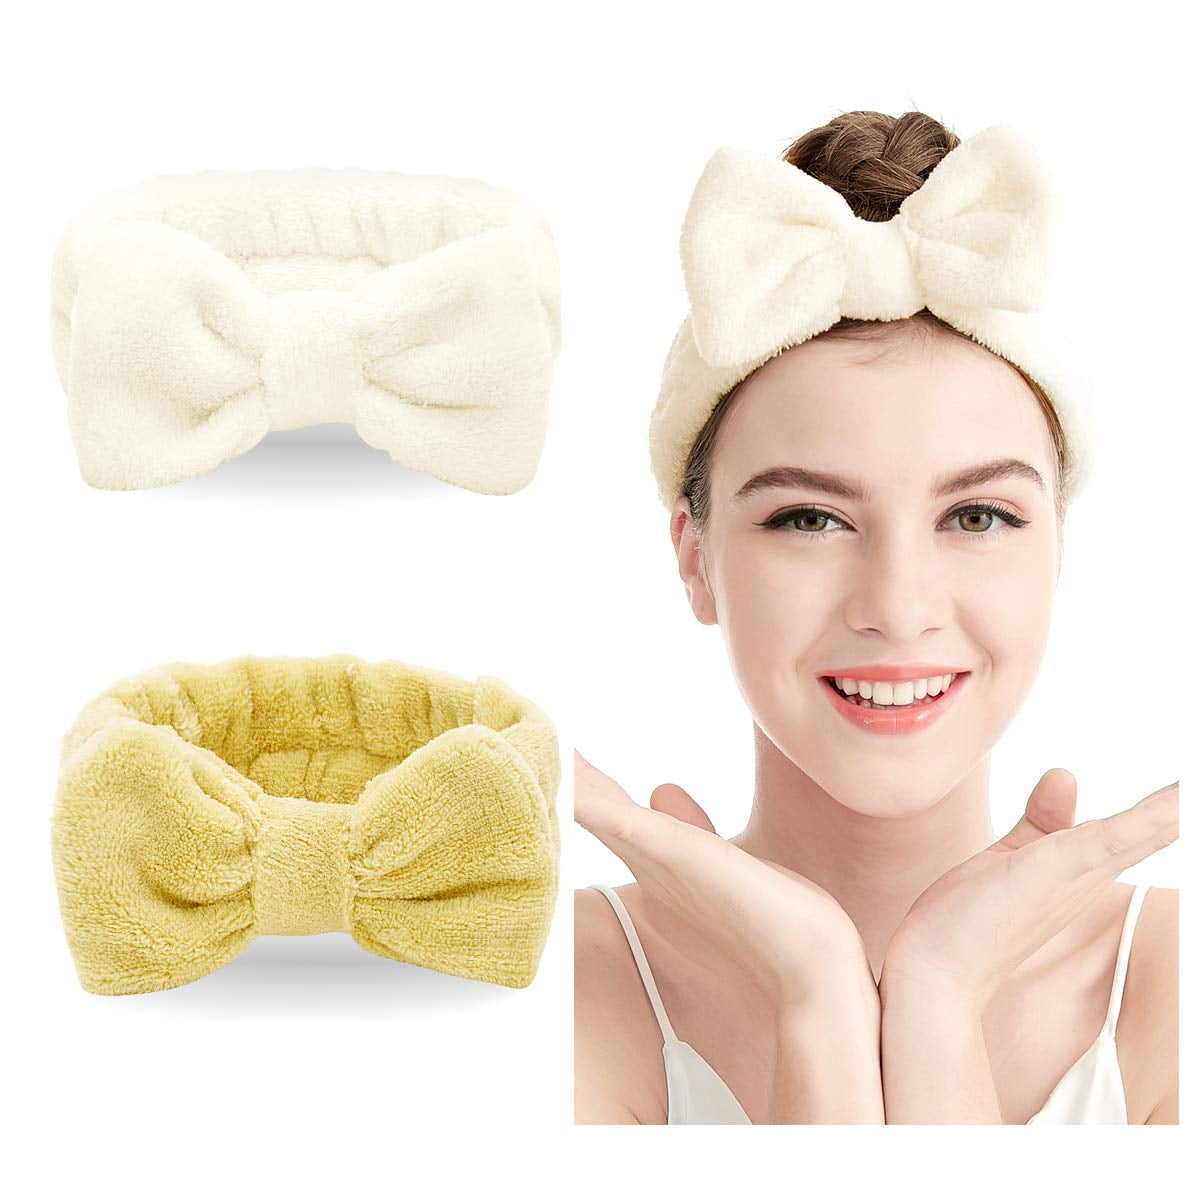  Soft Hairband,Datework Cute Women Girl Elastic Makeup Bow Knot  Head Wrap Bath Spa Face Headband,Face Washing, Facial Mask, Spa, Cosplay,  Party, (I) : Beauty & Personal Care